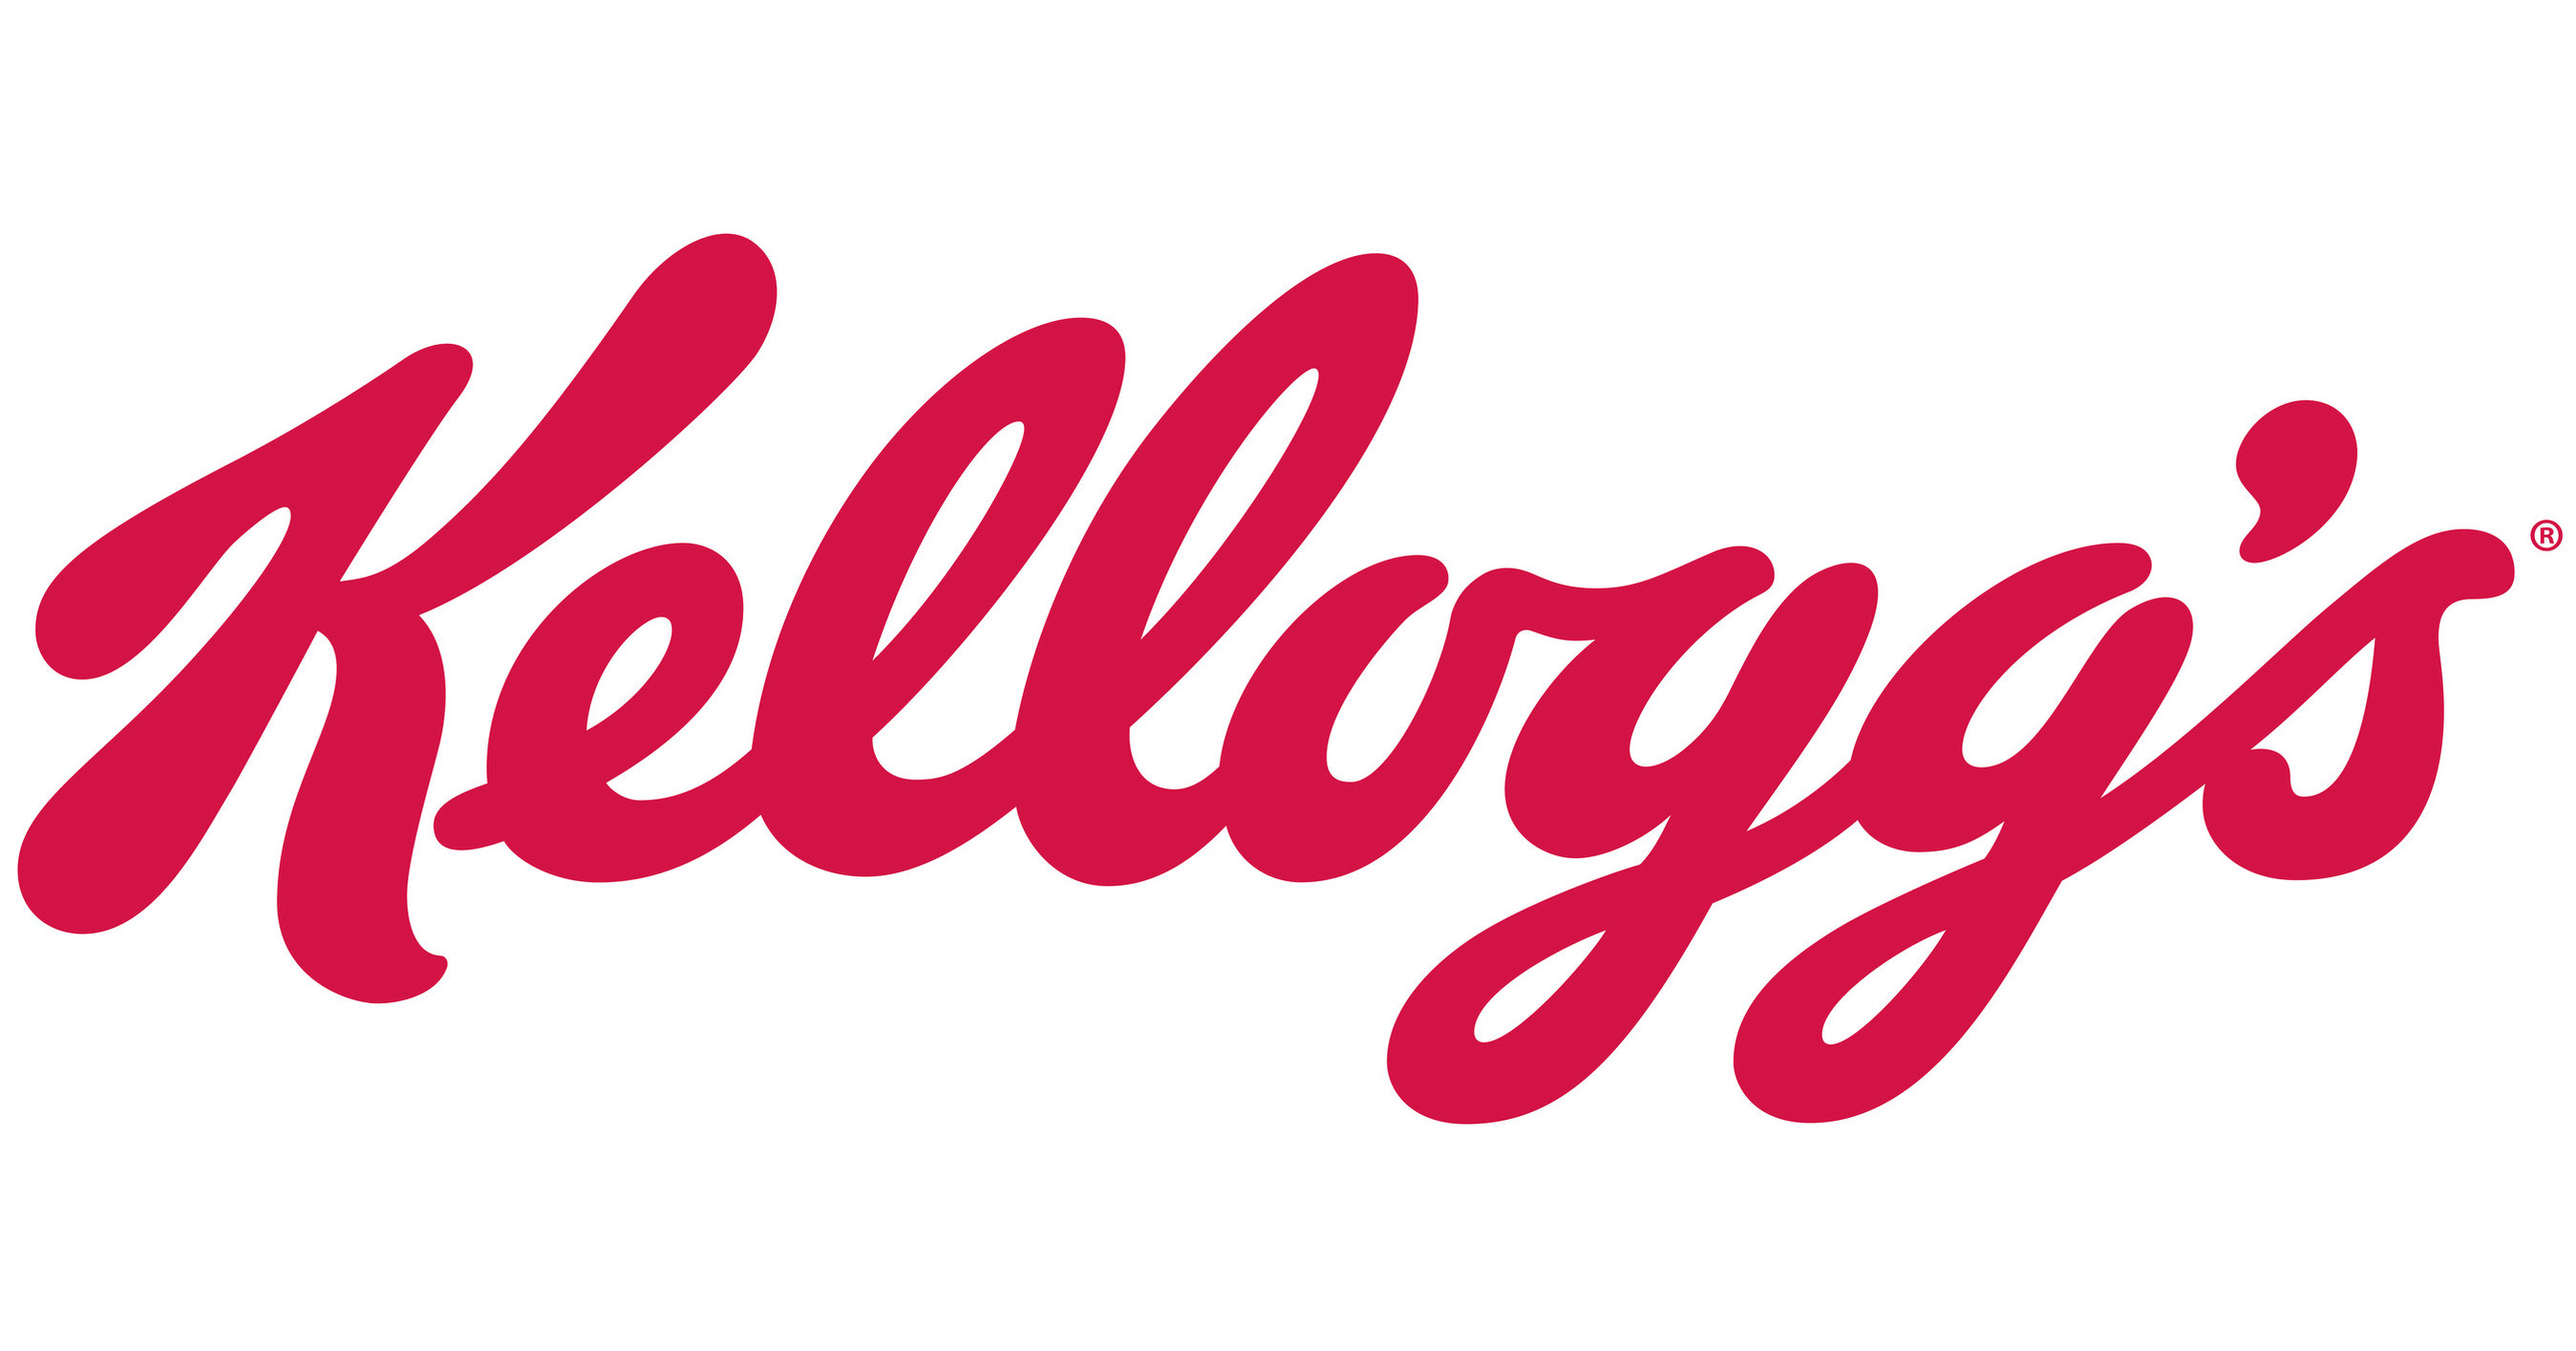 Kellogg Company Reaches Agreement to Sell Keebler Cookies and Related Businesses to Ferrero